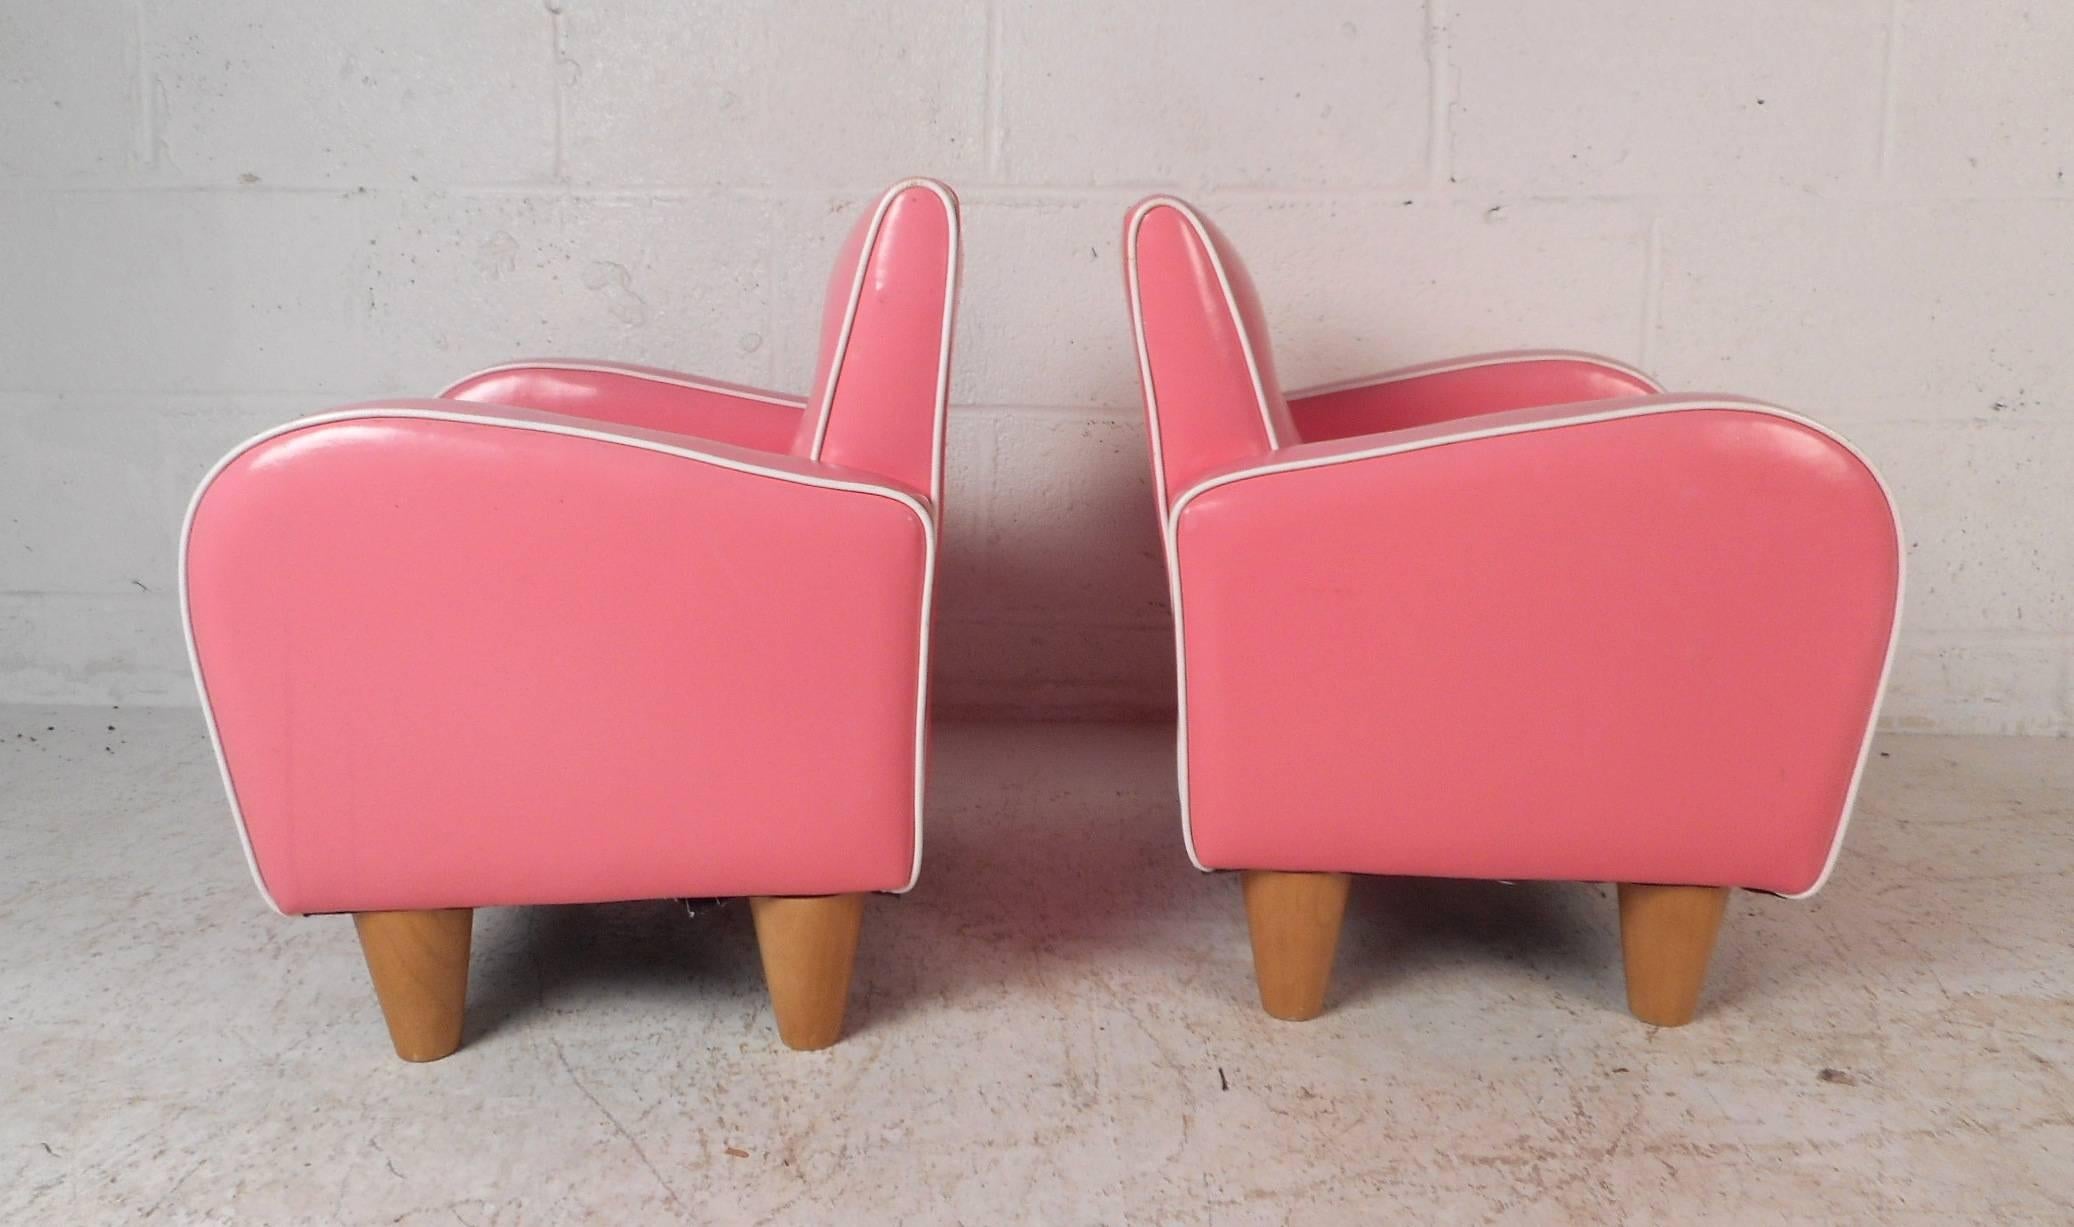 This wonderful pair of Art Deco style children's lounge chairs are covered in elaborate pink vinyl with high arm rests lined with white trim along the edges. These beautiful chairs have tufted back rests and sturdy tapered legs. This stunning pair